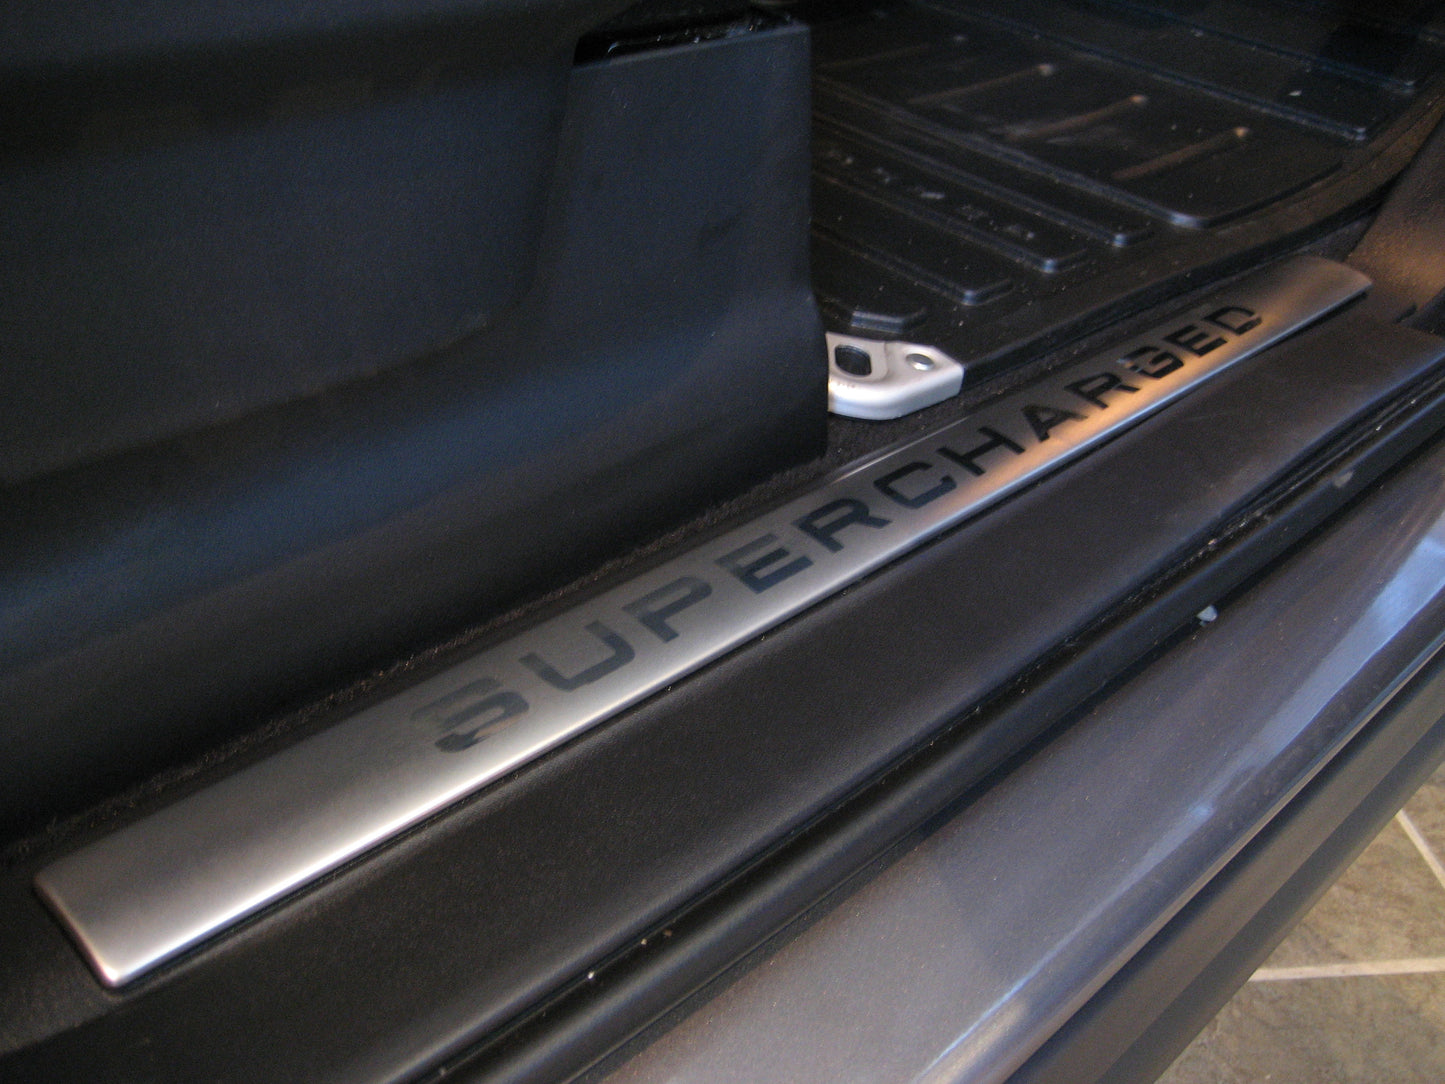 Inner Sill Inserts Stainless Steel - 'SUPERCHARGED' for Range Rover Sport